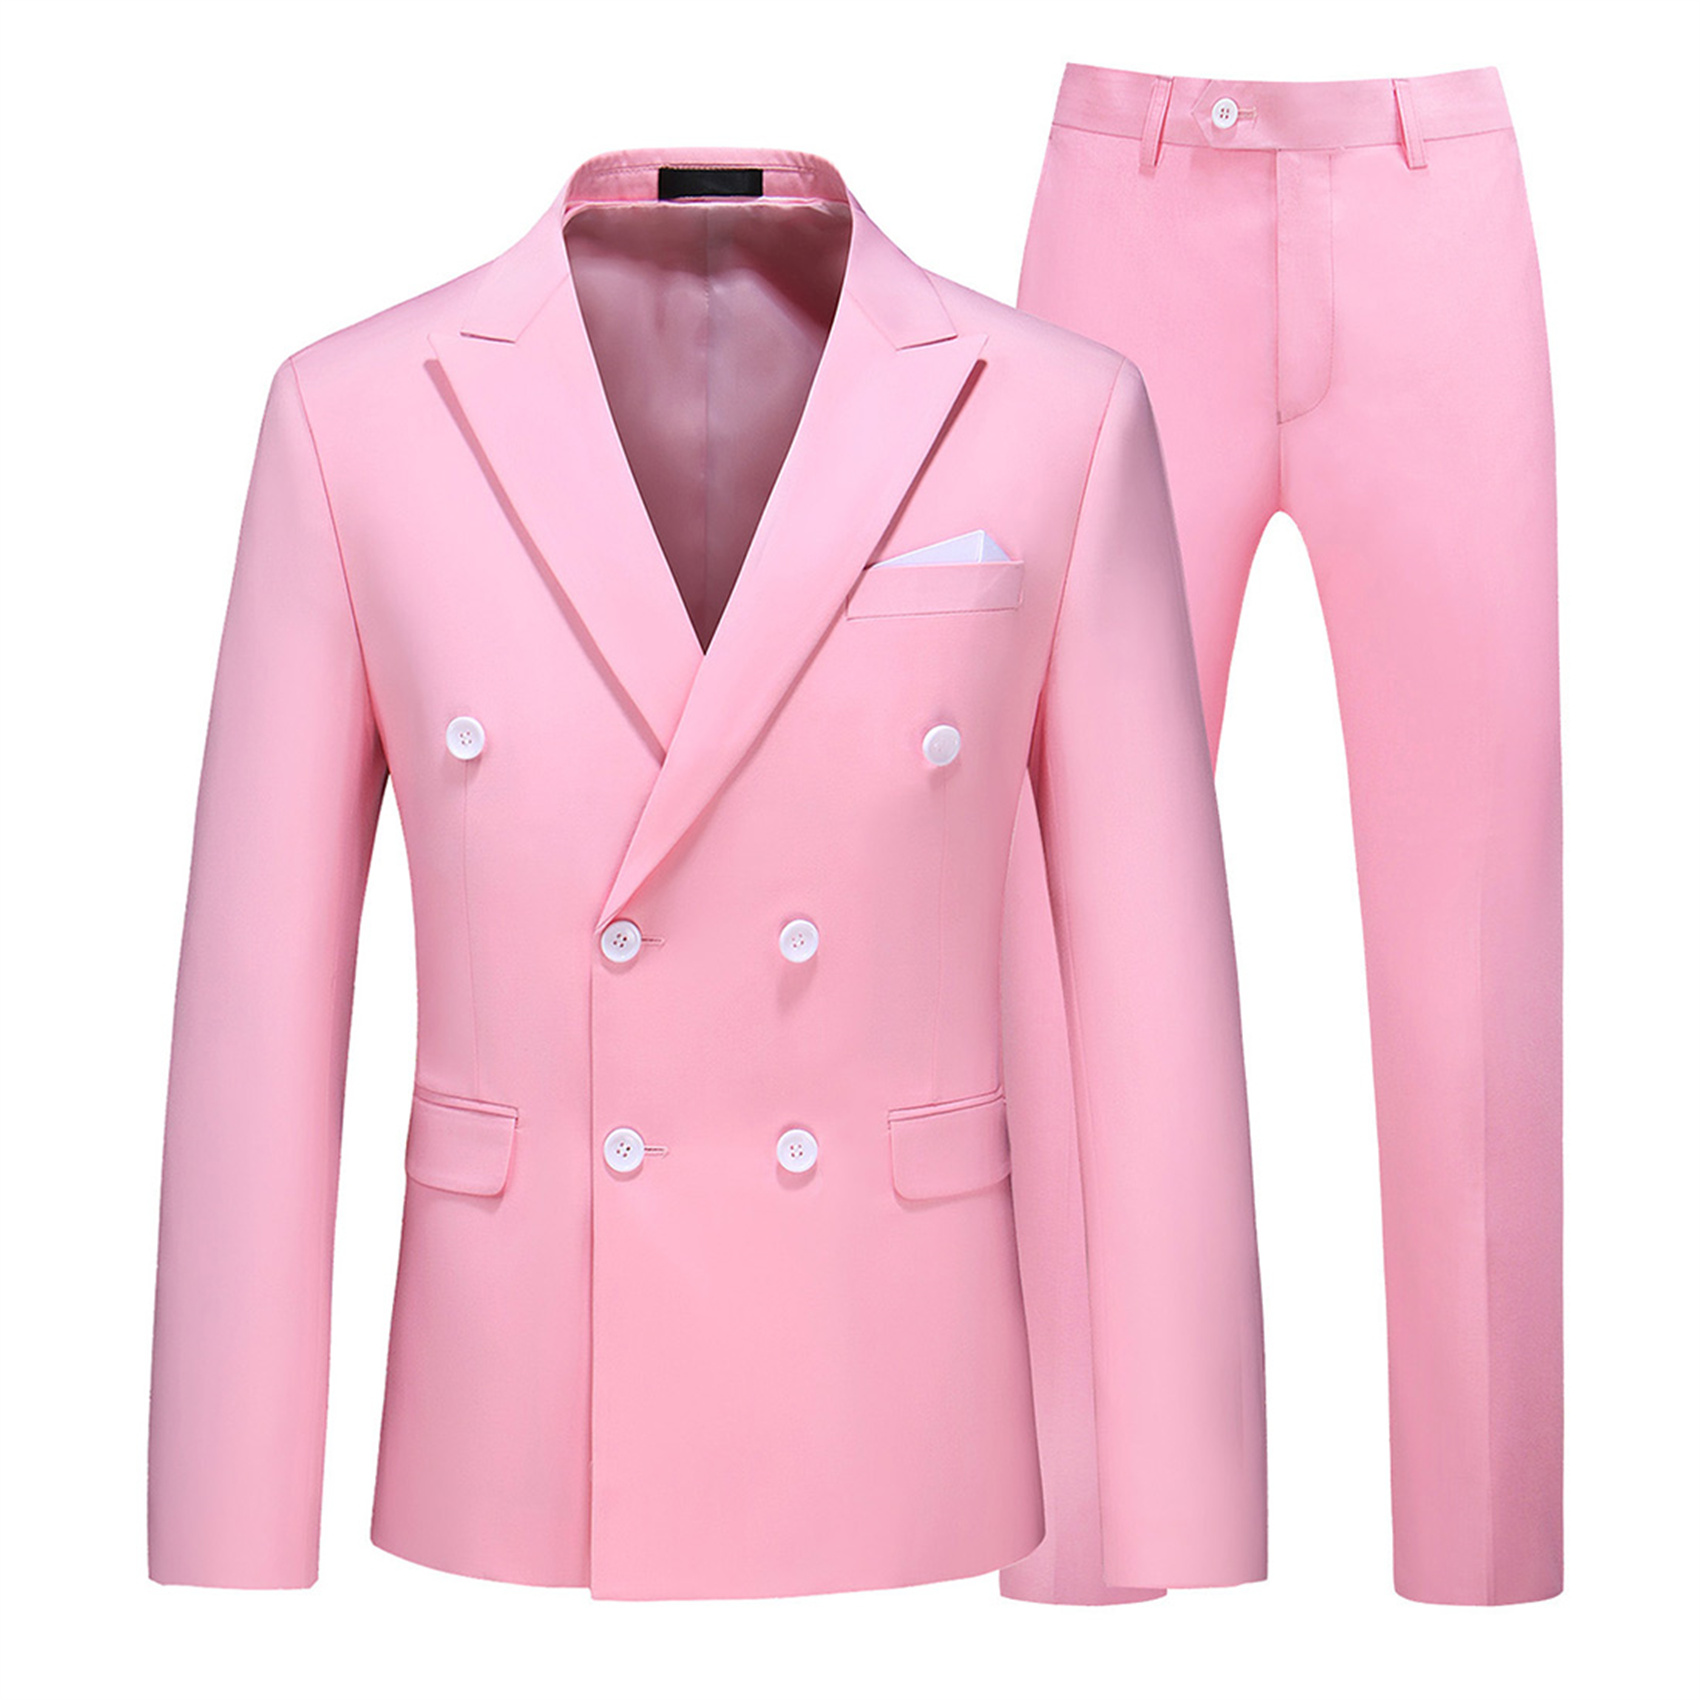 2 Piece Double Breasted Suit for Men, Slim Fit, Light Pink